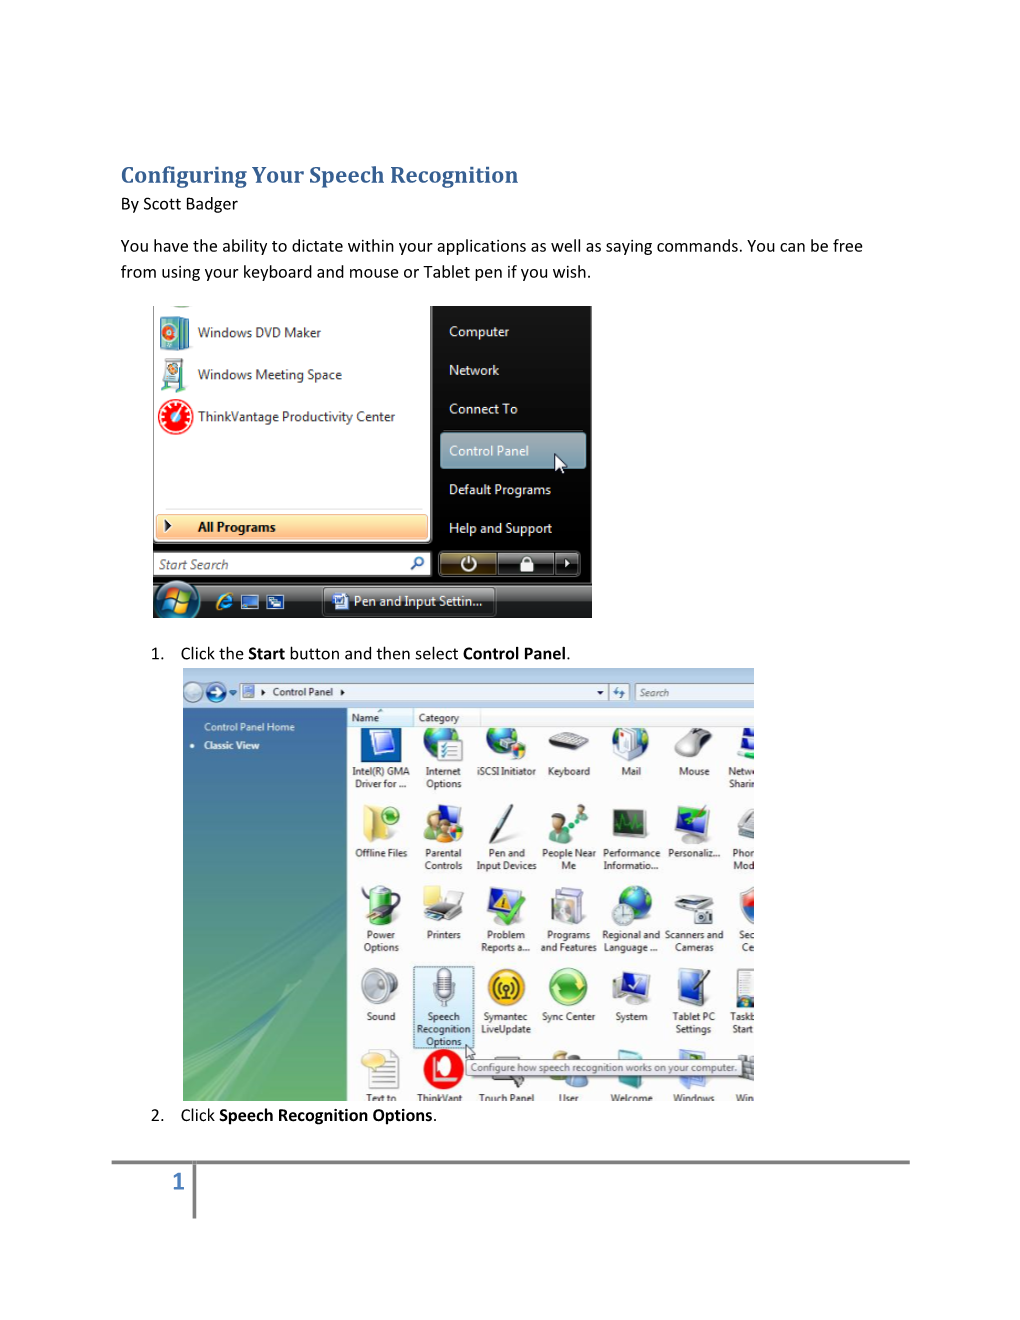 Configuring Your Speech Recognition by Scott Badger